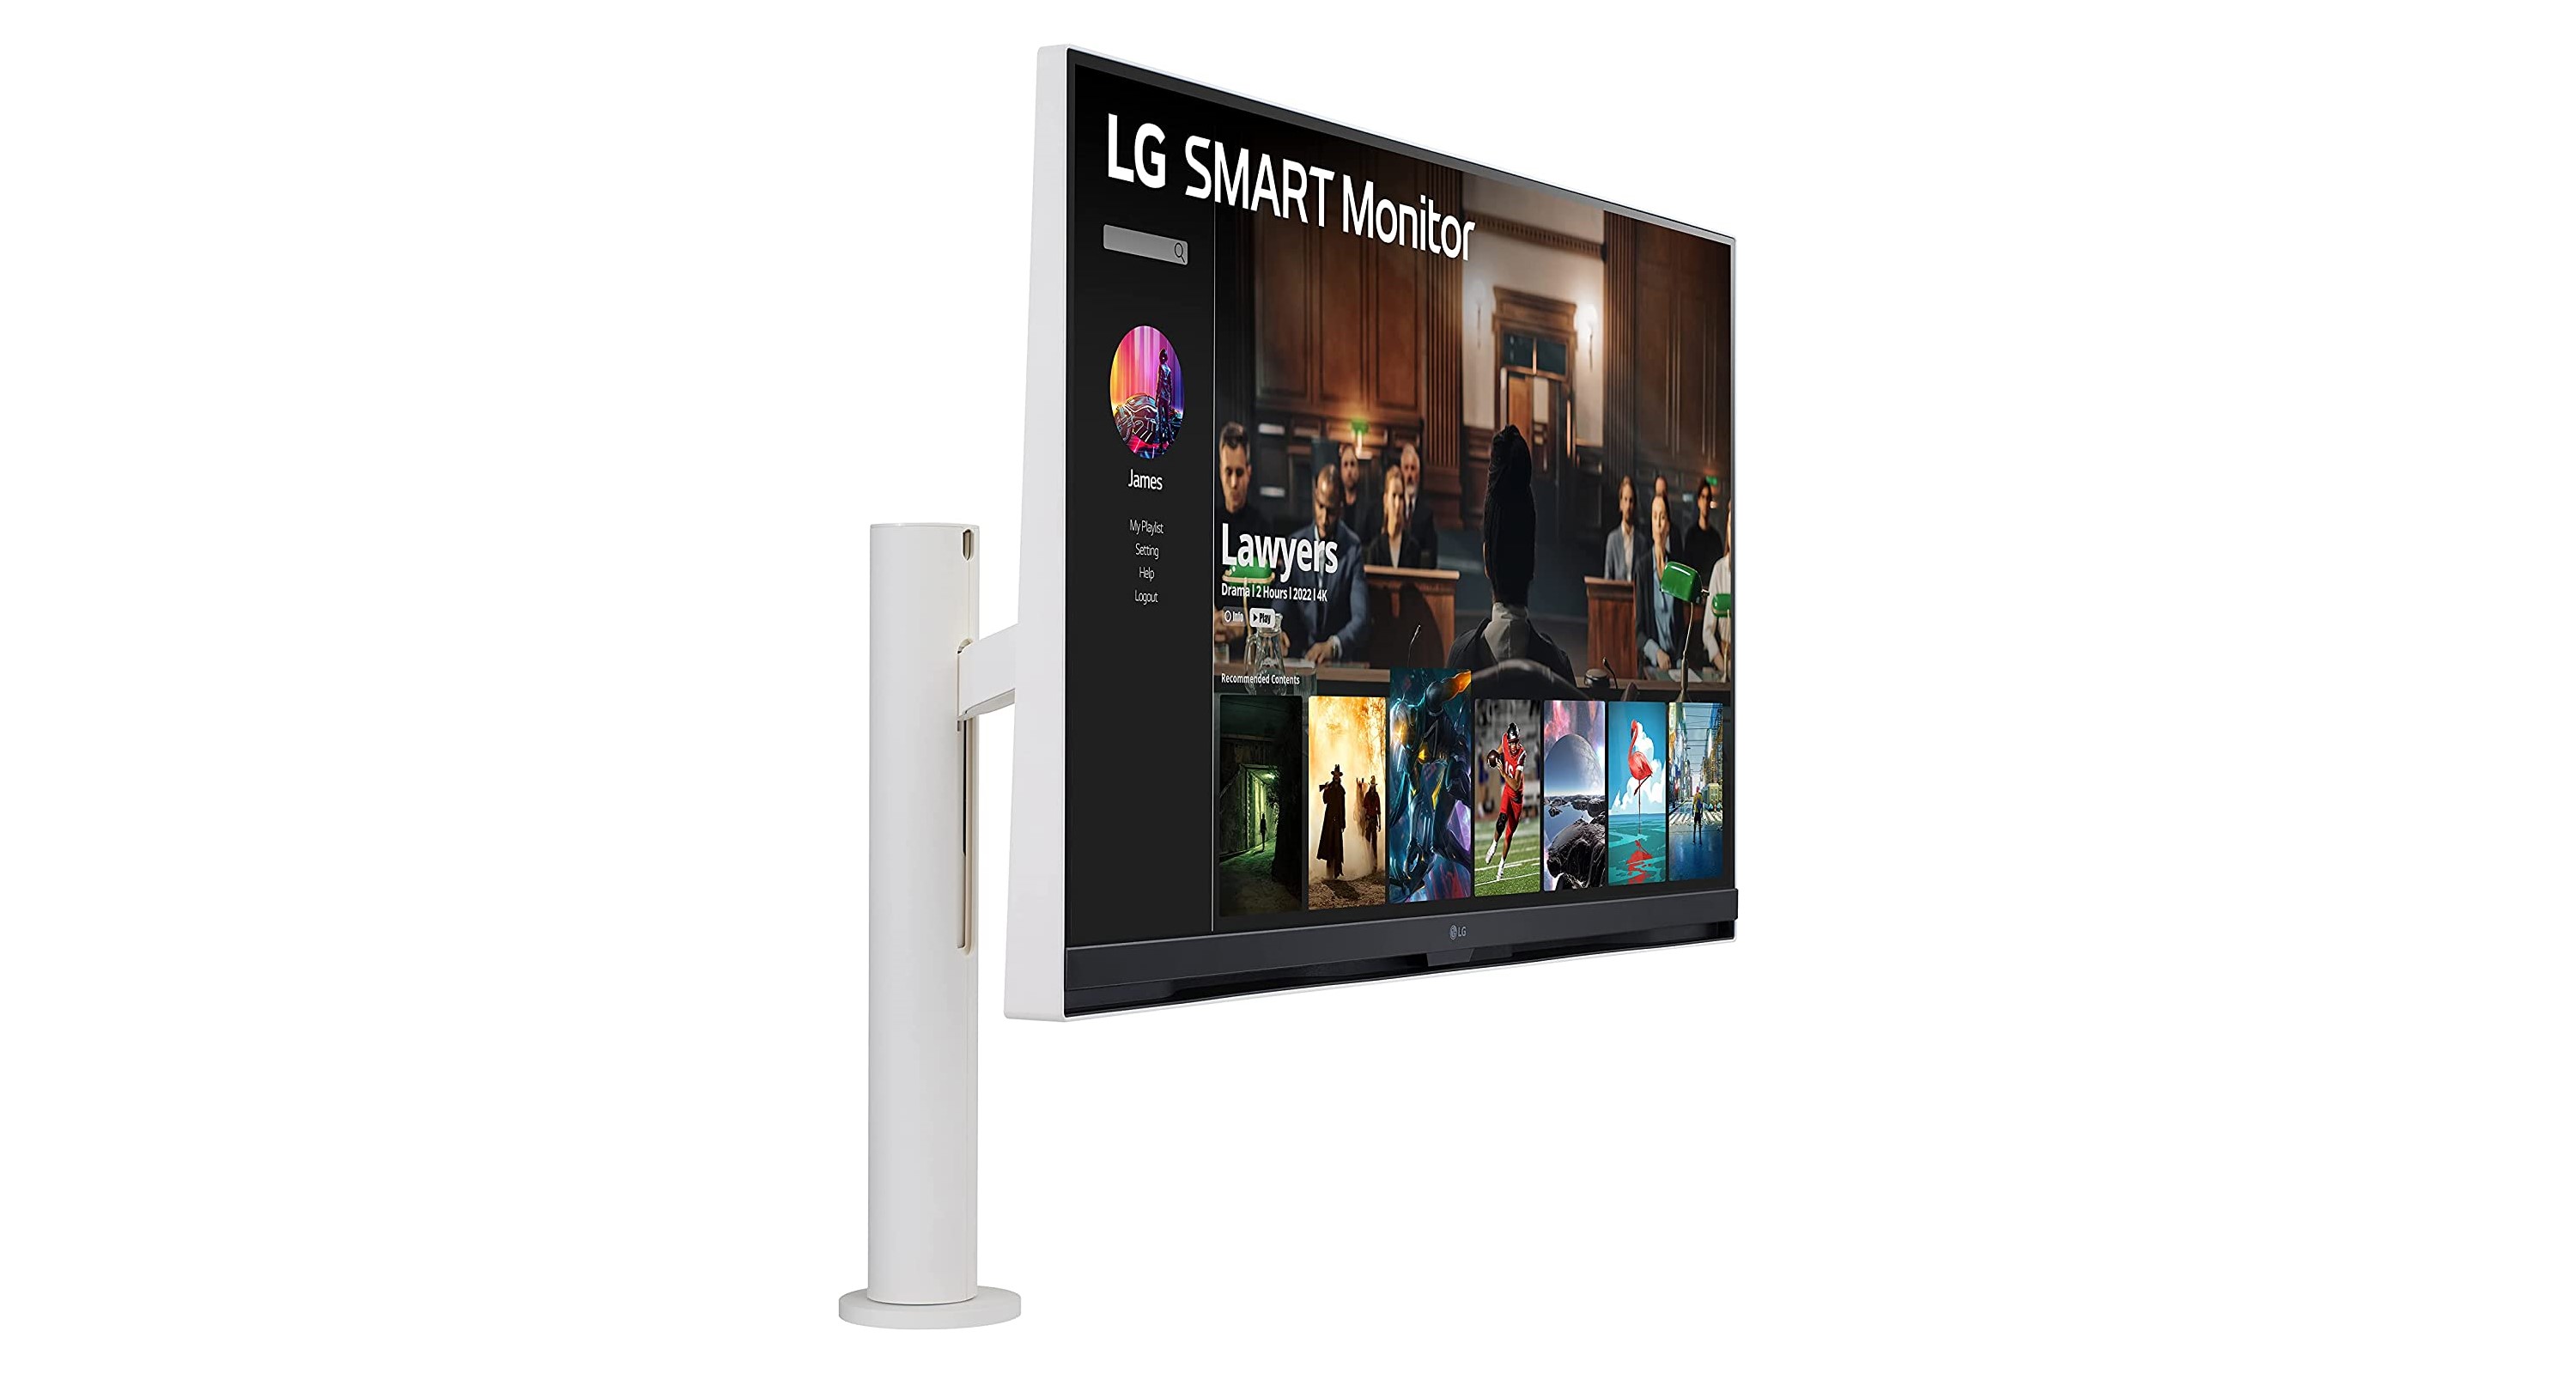 LG Smart Monitor 32SQ780S is unleashed on the US market to take the 4K Samsung M8 on